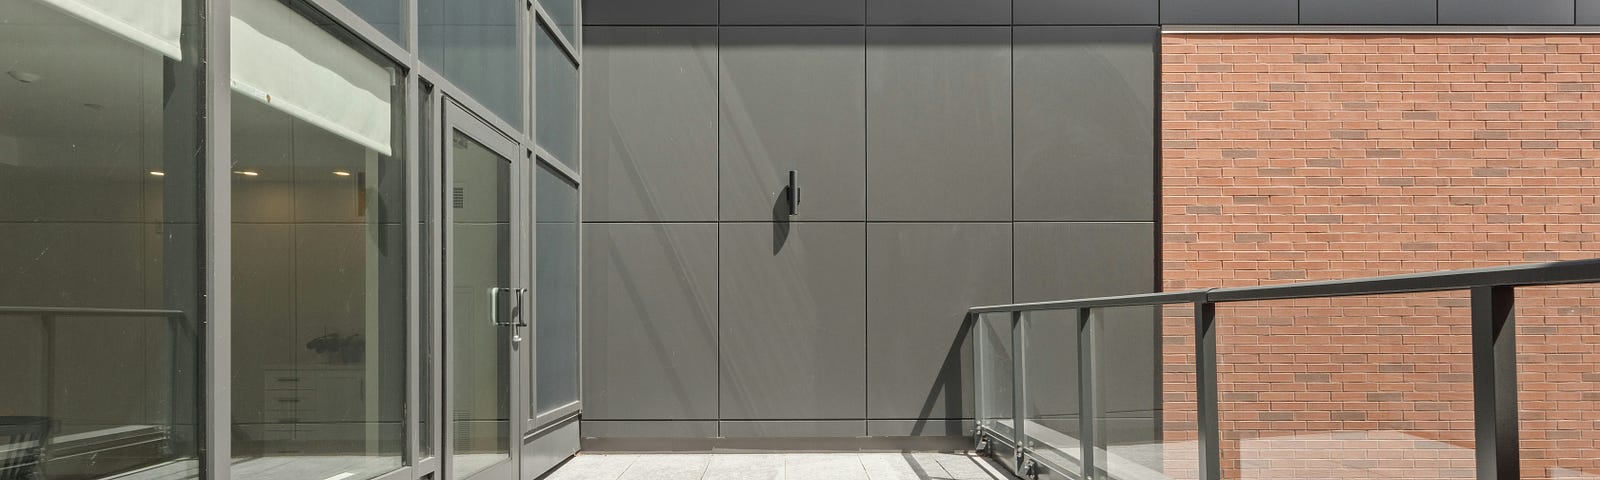 Concrete balcony with stainless steel and glass railing